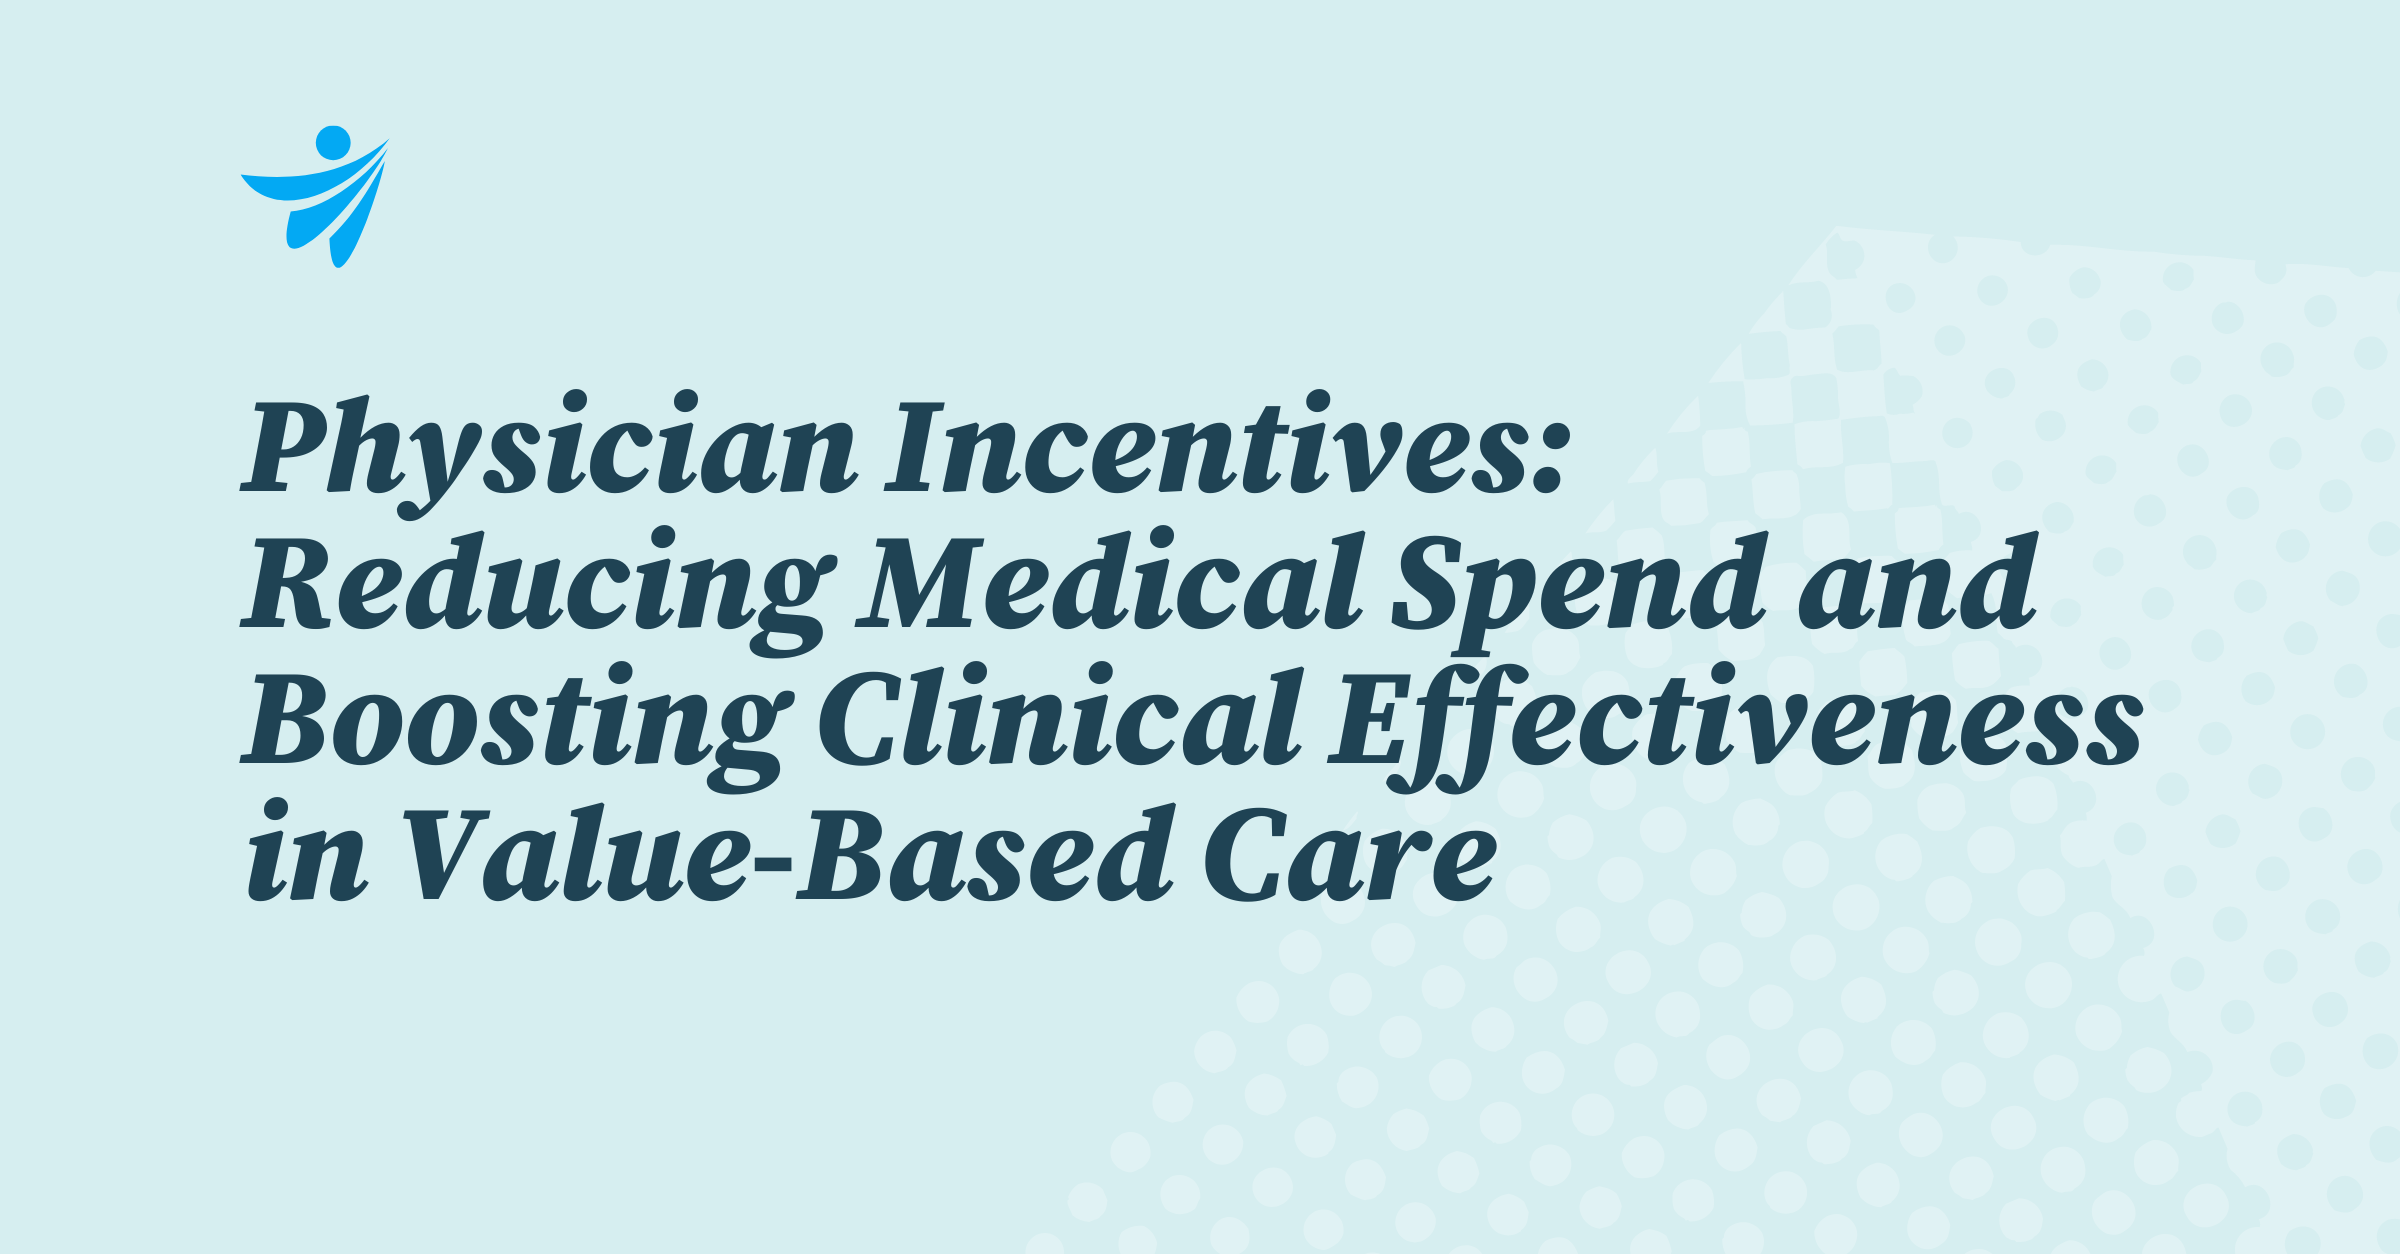 Thumbnail for Physician Incentives: Reducing Medical Spend and Boosting Clinical Effectiveness in Value-Based Care